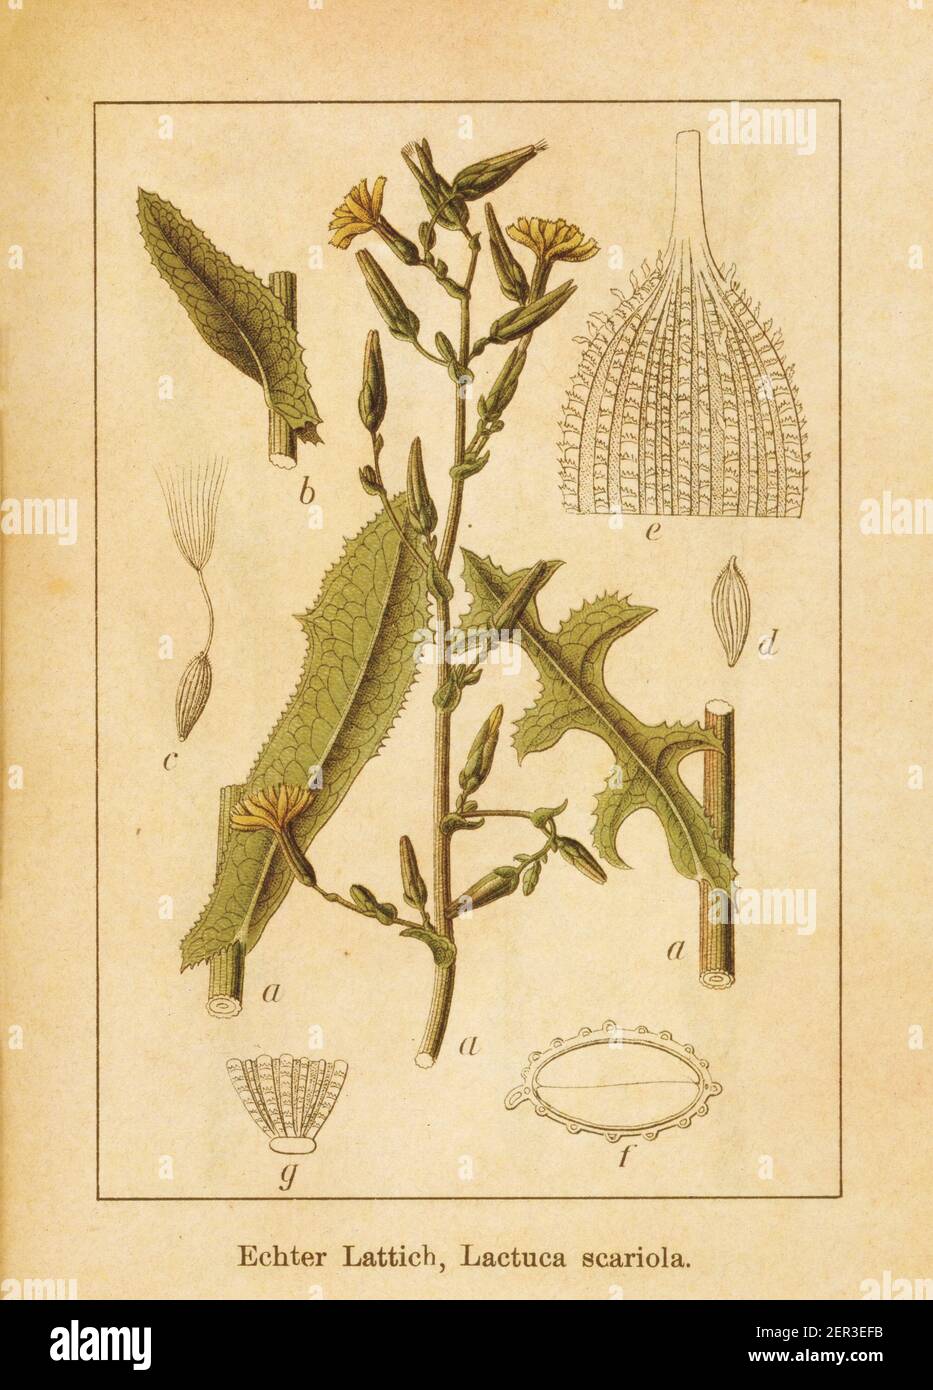 Antique illustration of a lactuca sativa, also known as lactuca scariola, lettuce or garden lettuce. Engraved by Jacob Sturm (1771-1848) and published Stock Photo